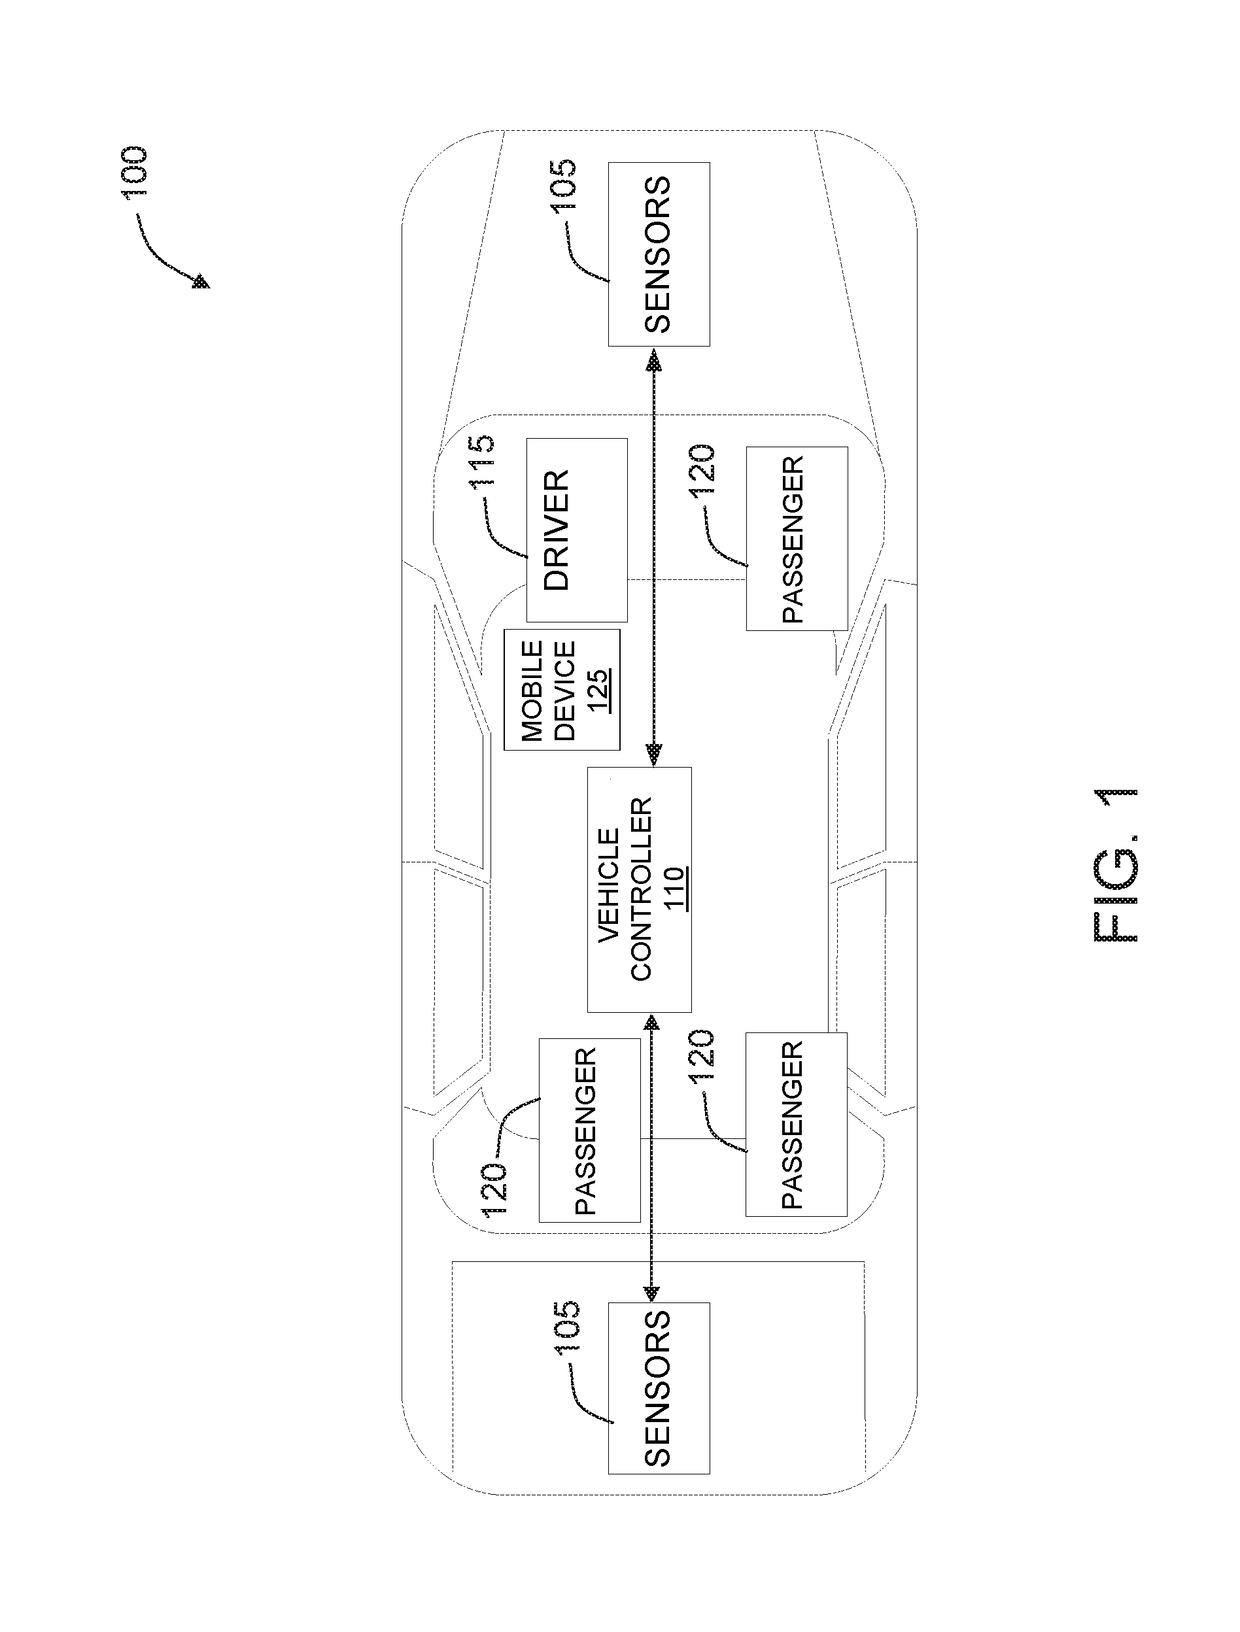 Systems and methods for reconstruction of a vehicular crash